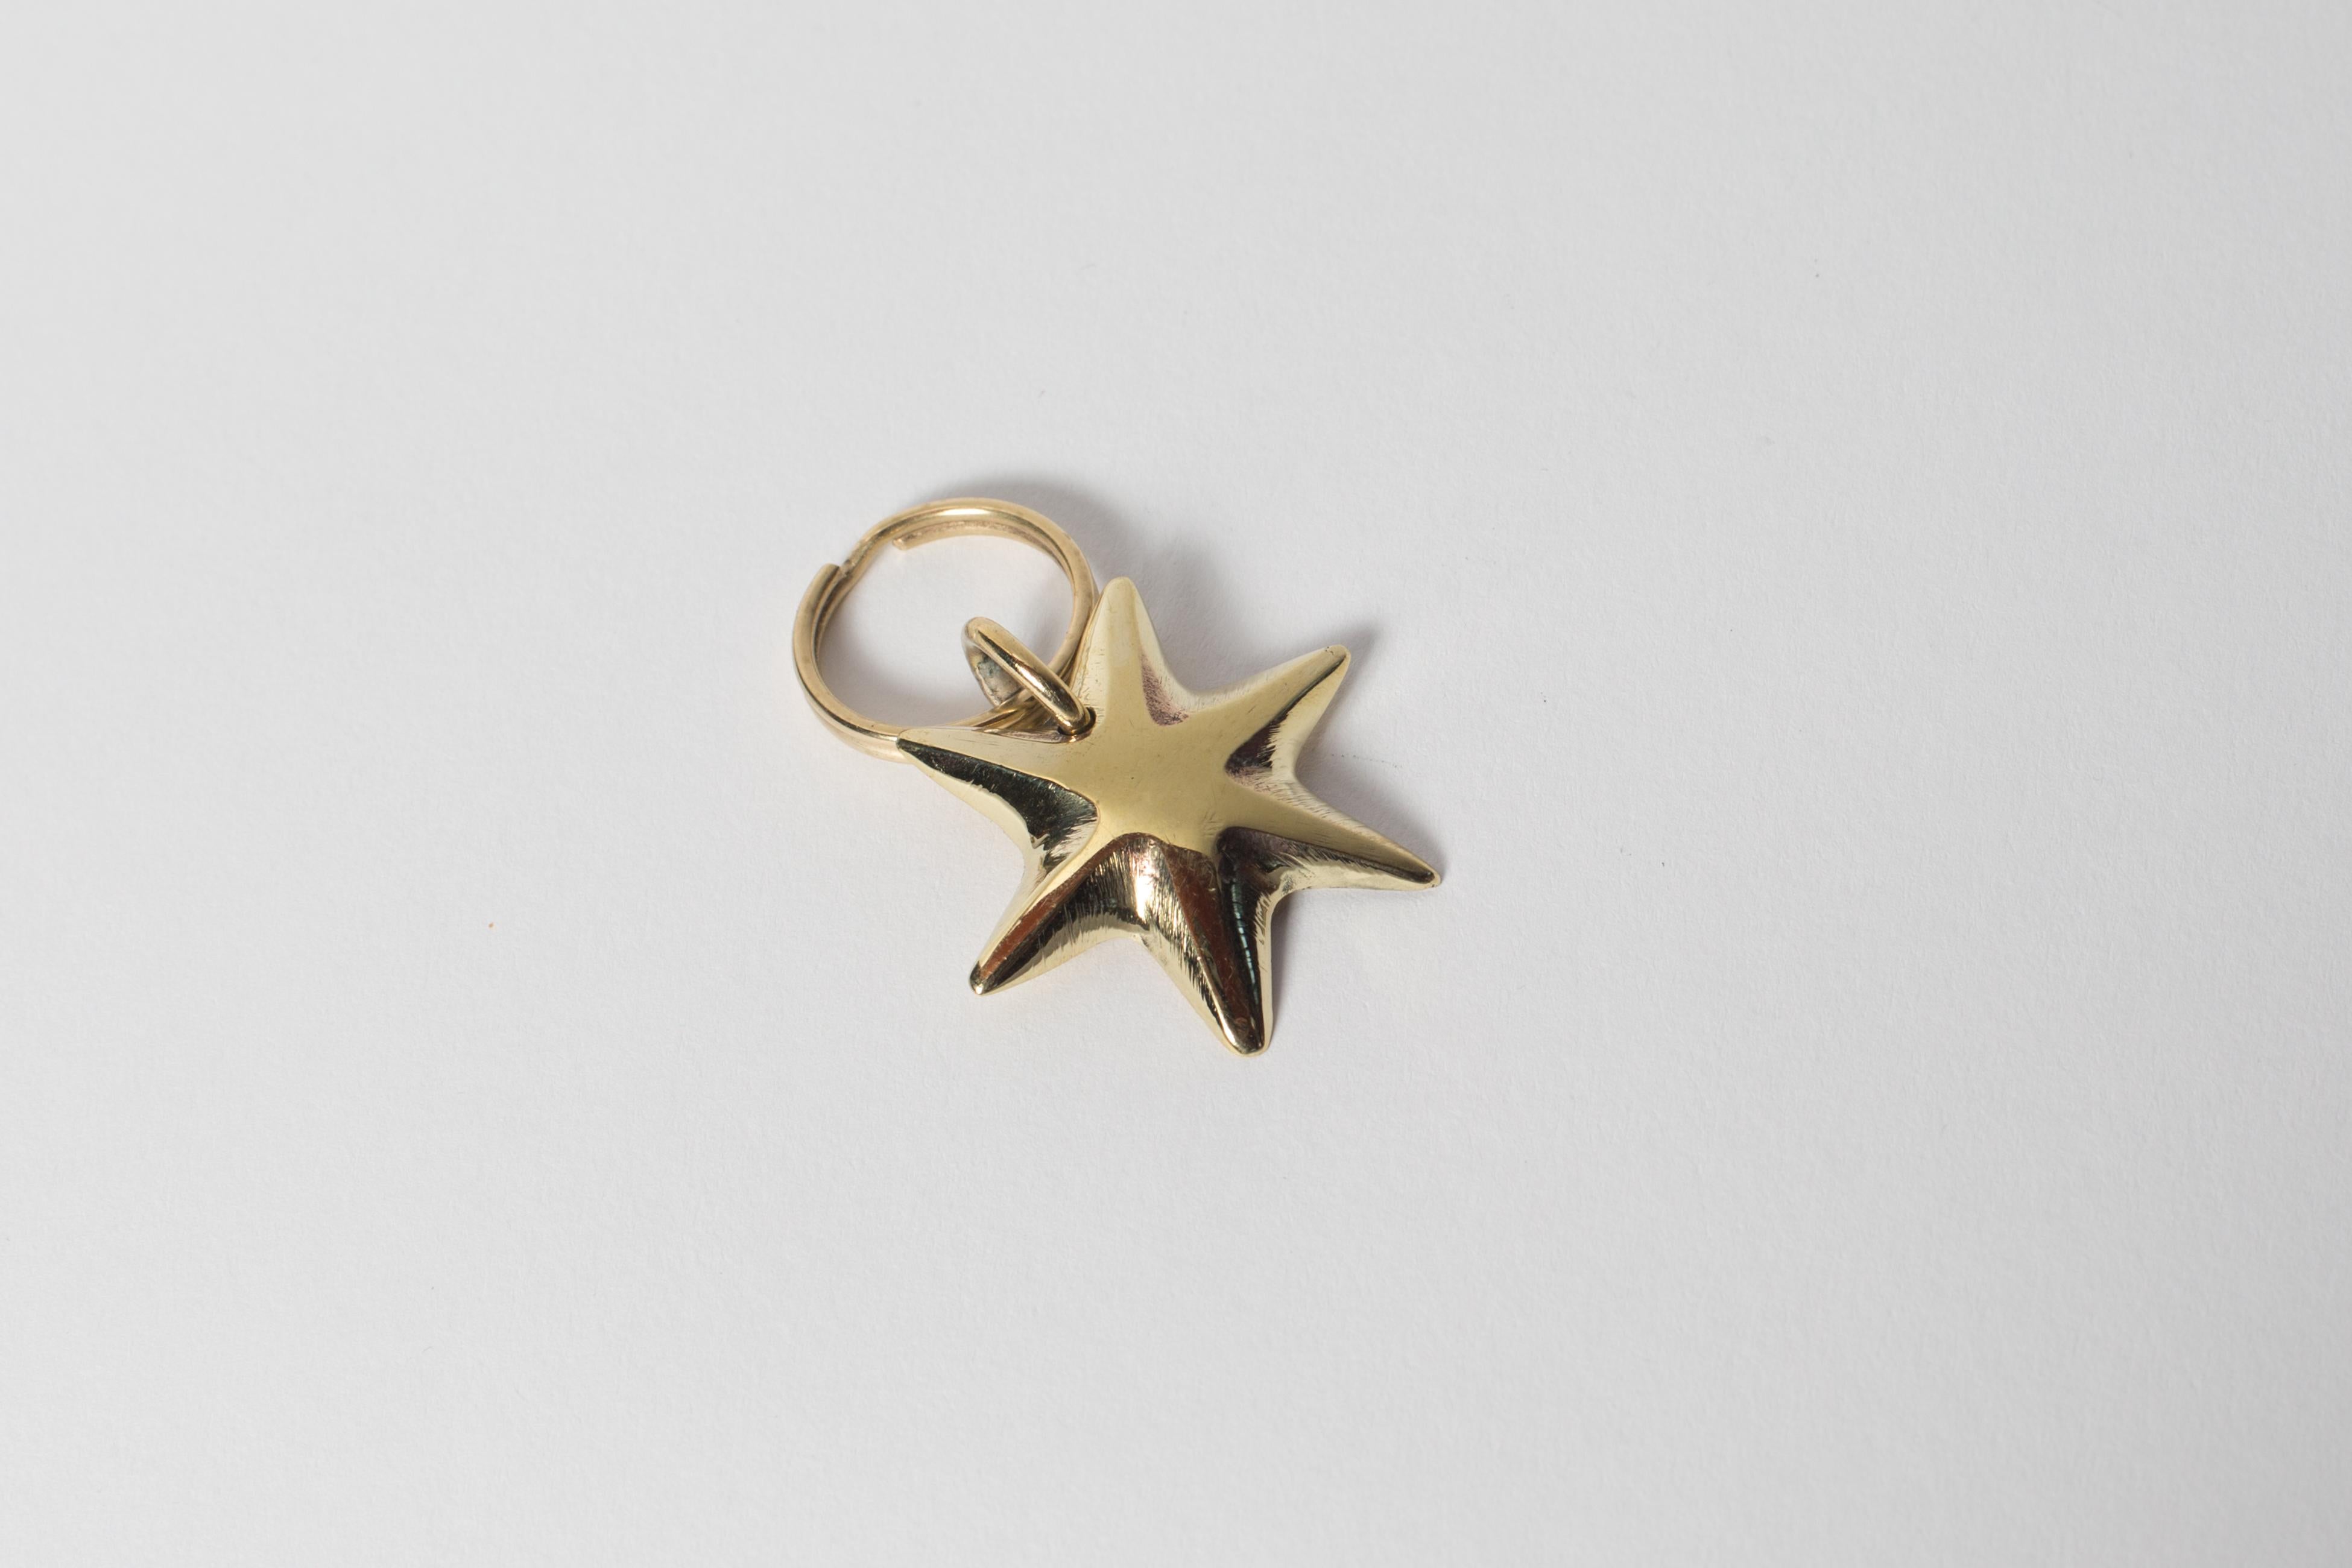 Polished Carl Auböck Model #5615 'Star' Solid Brass Keyring with Signature For Sale